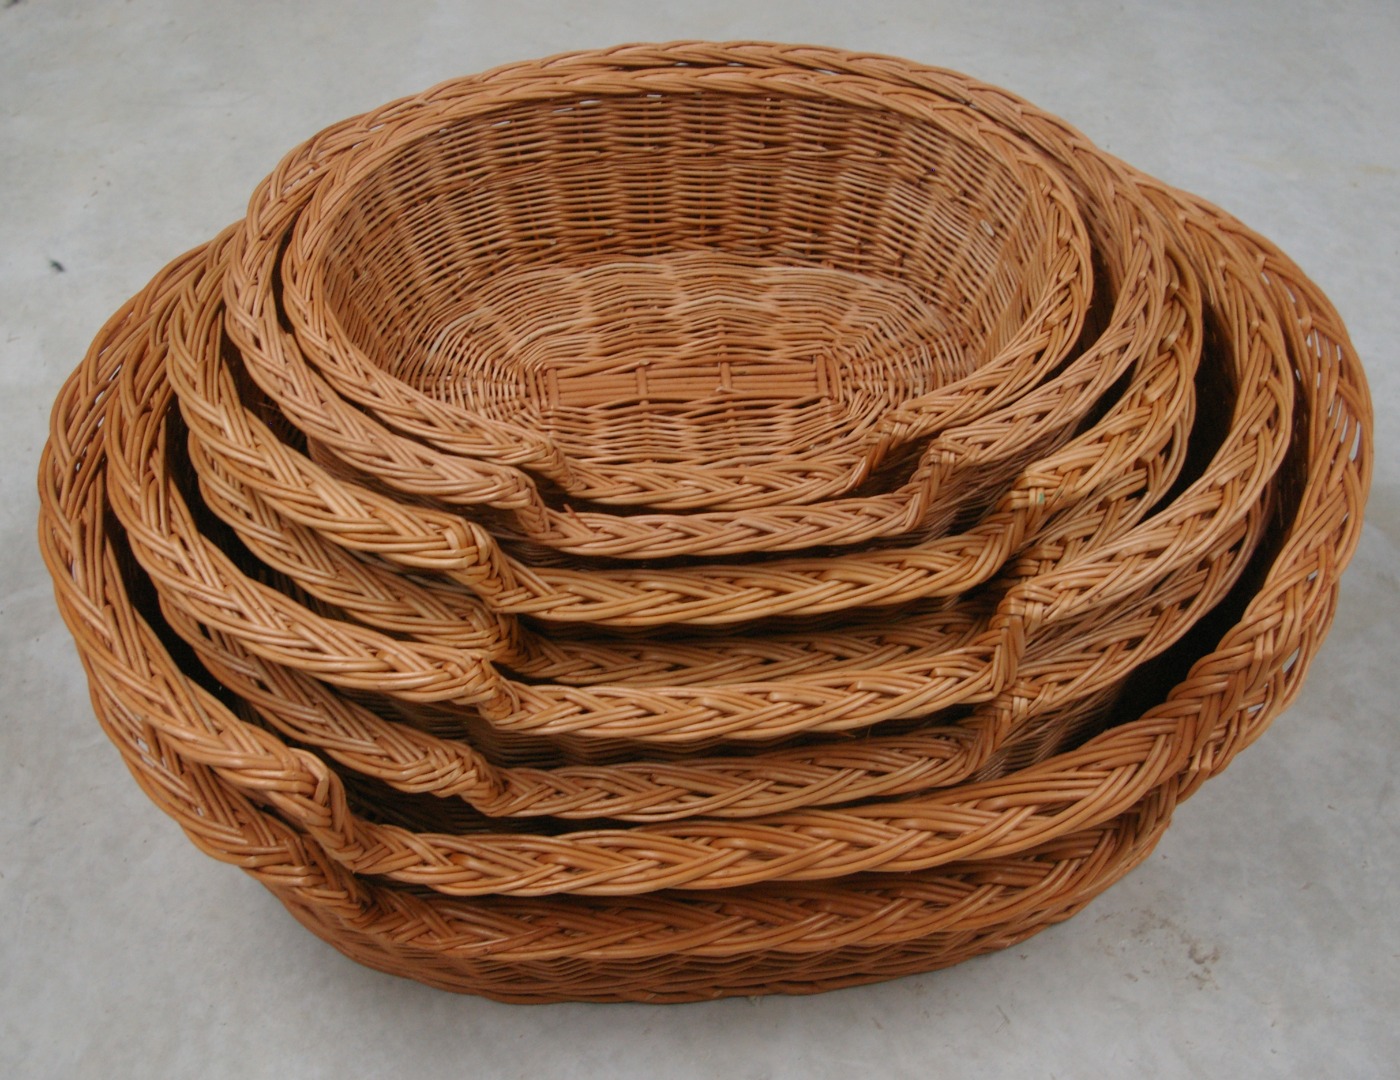 The Natural Willow  Wicker Dog or Cat Bed Basket Hand Made 5 Sizes